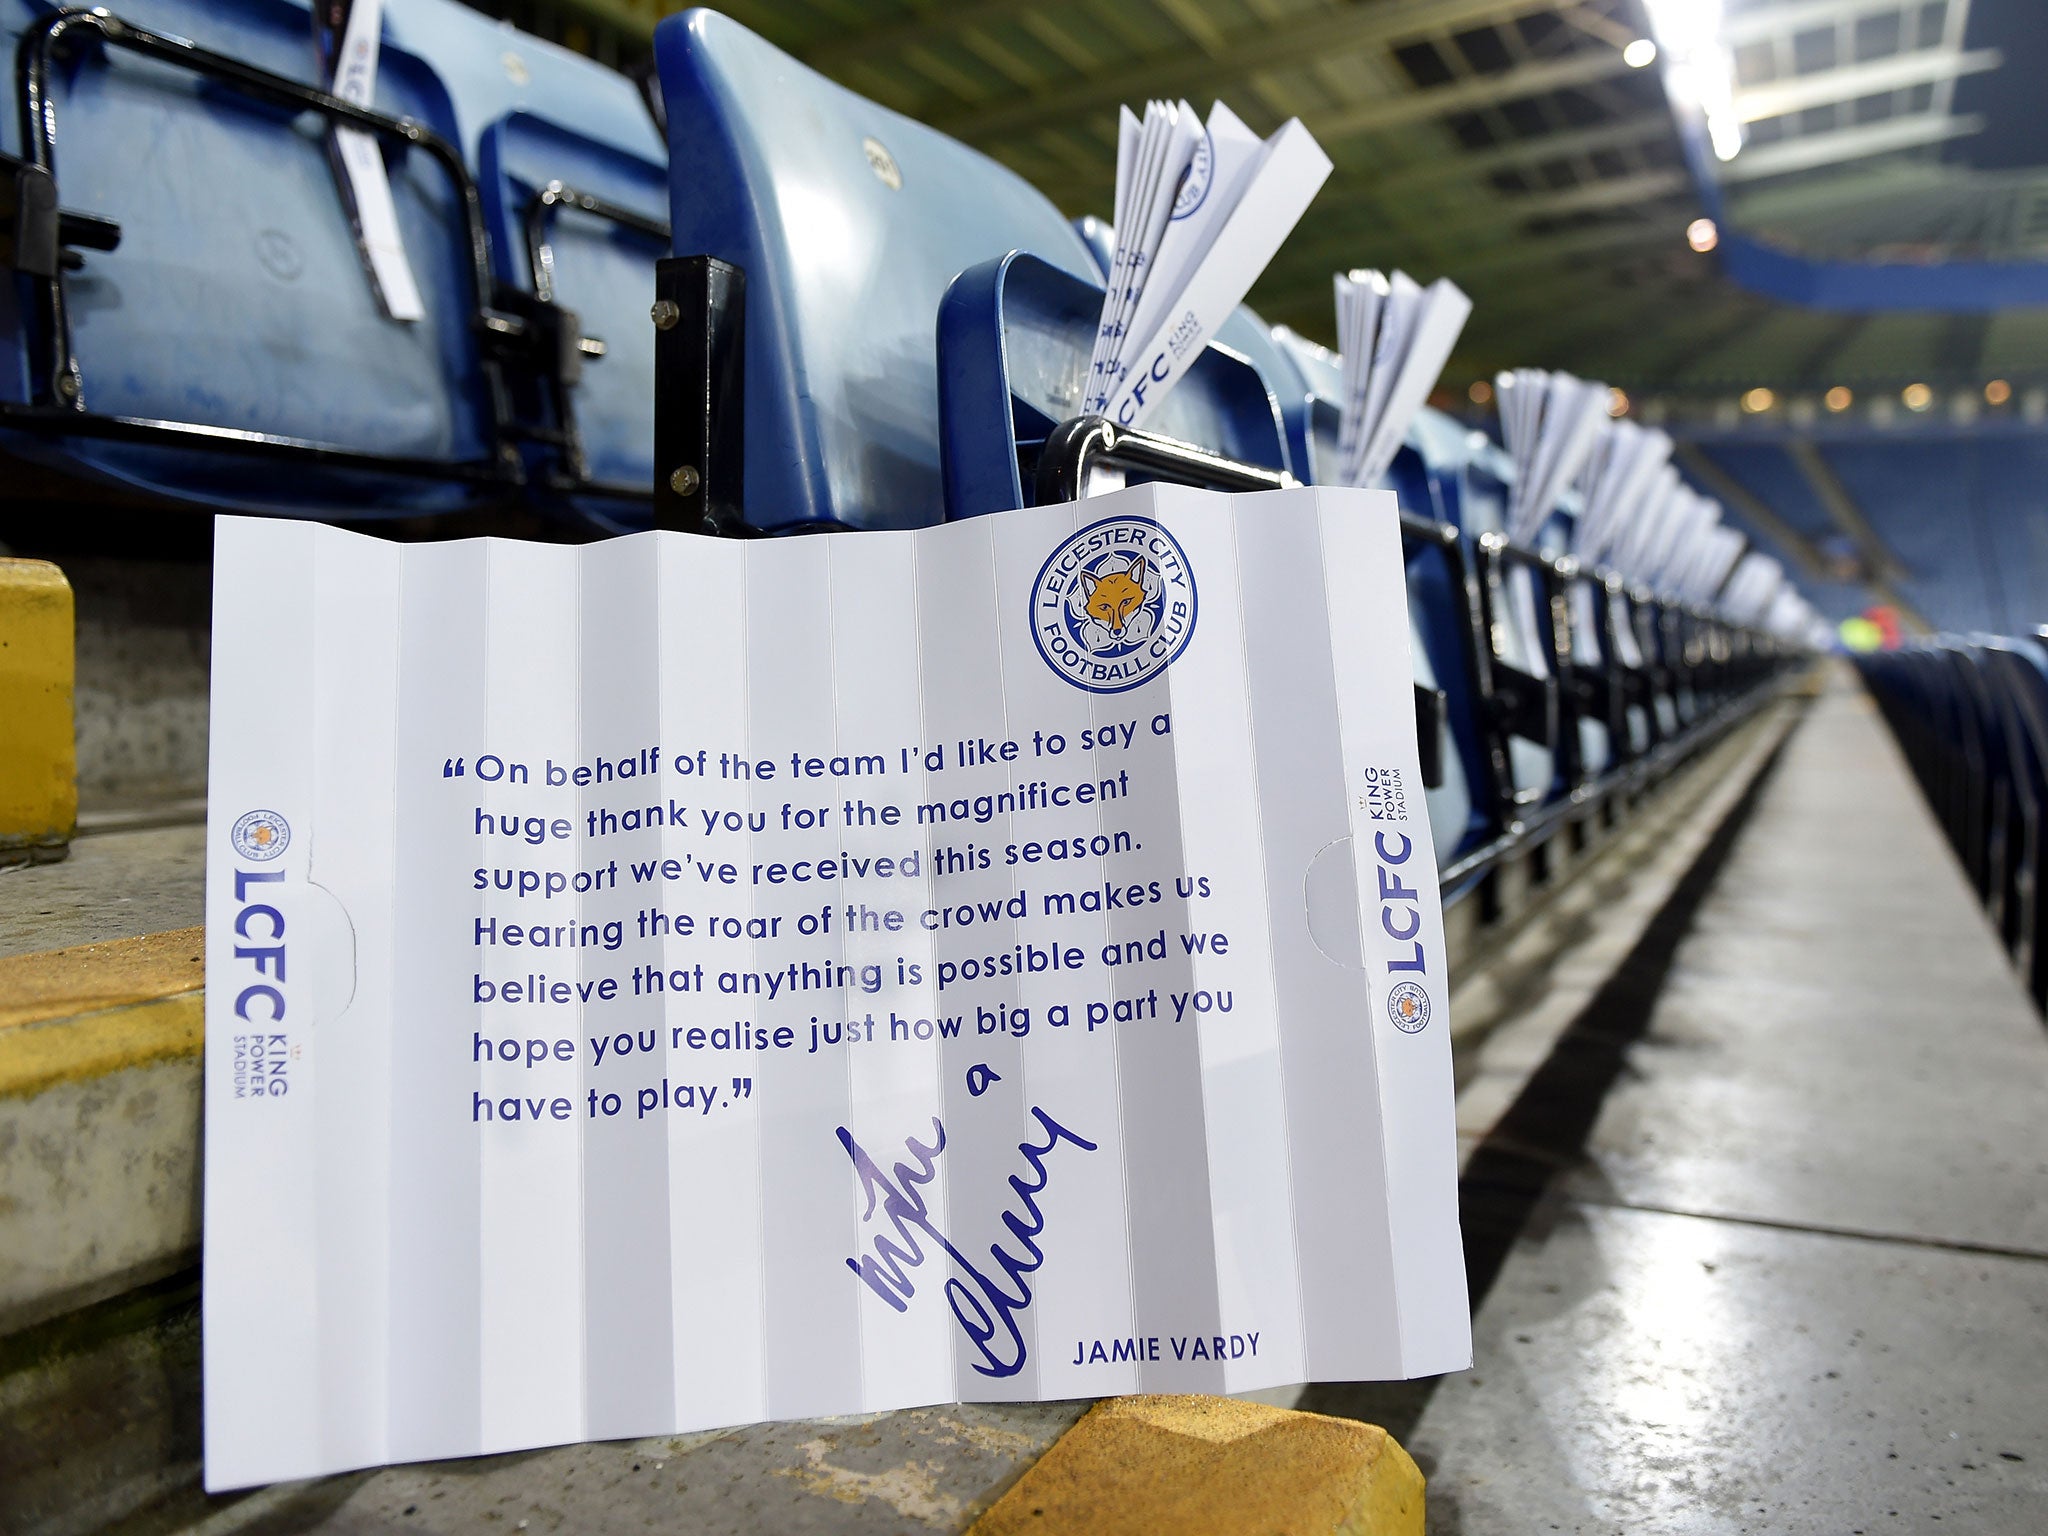 Jamie Vardy has left a personalised note for Leicester fans at tonight's game